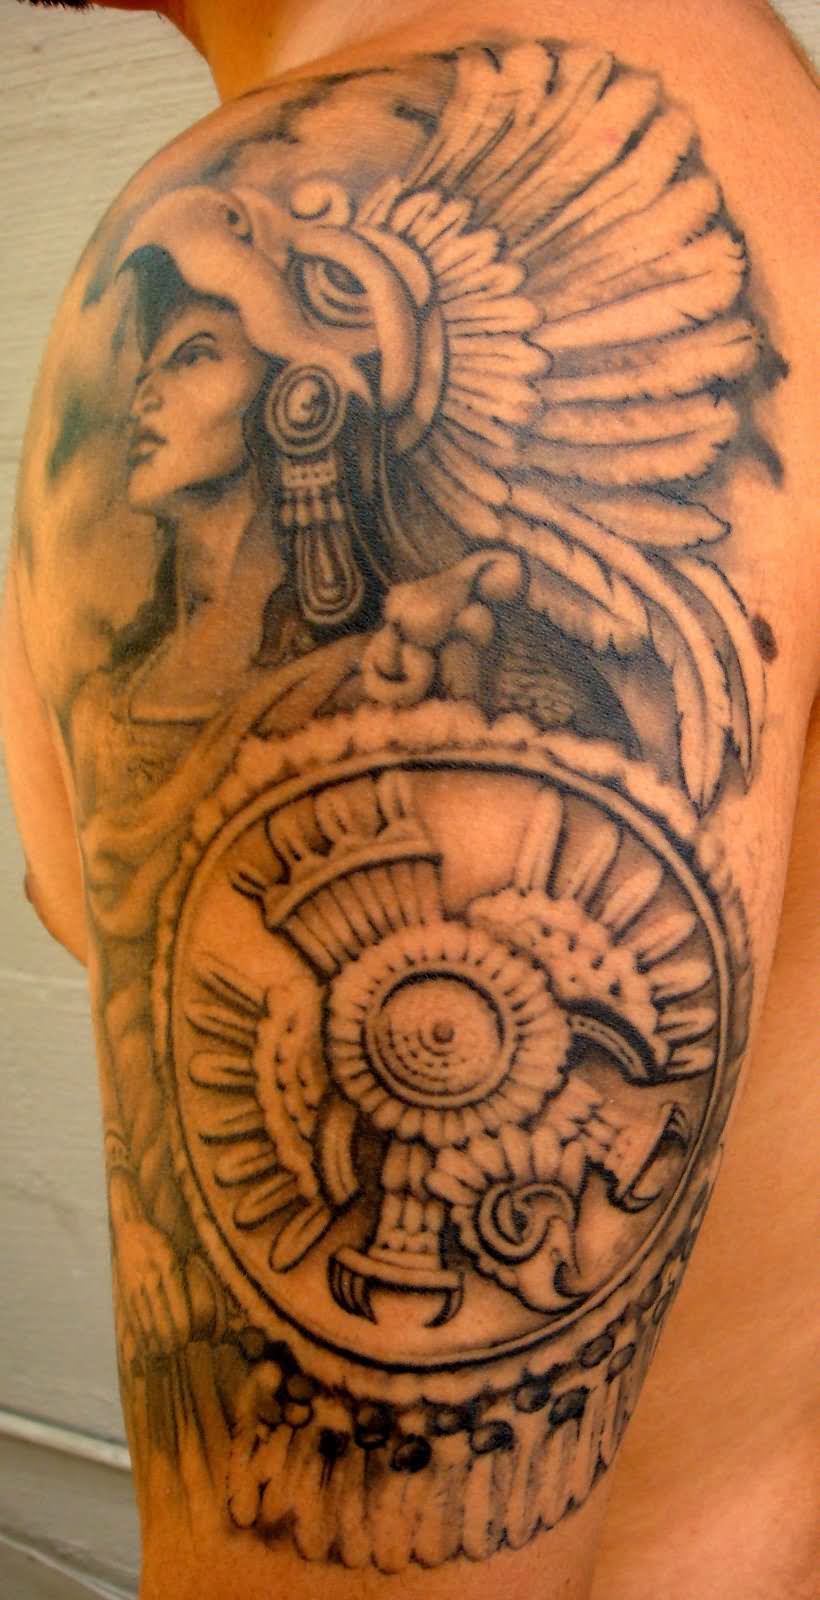 25 Aztec Tattoos Ideas Which Substitutes Tribal Tattoo - The Xerxes